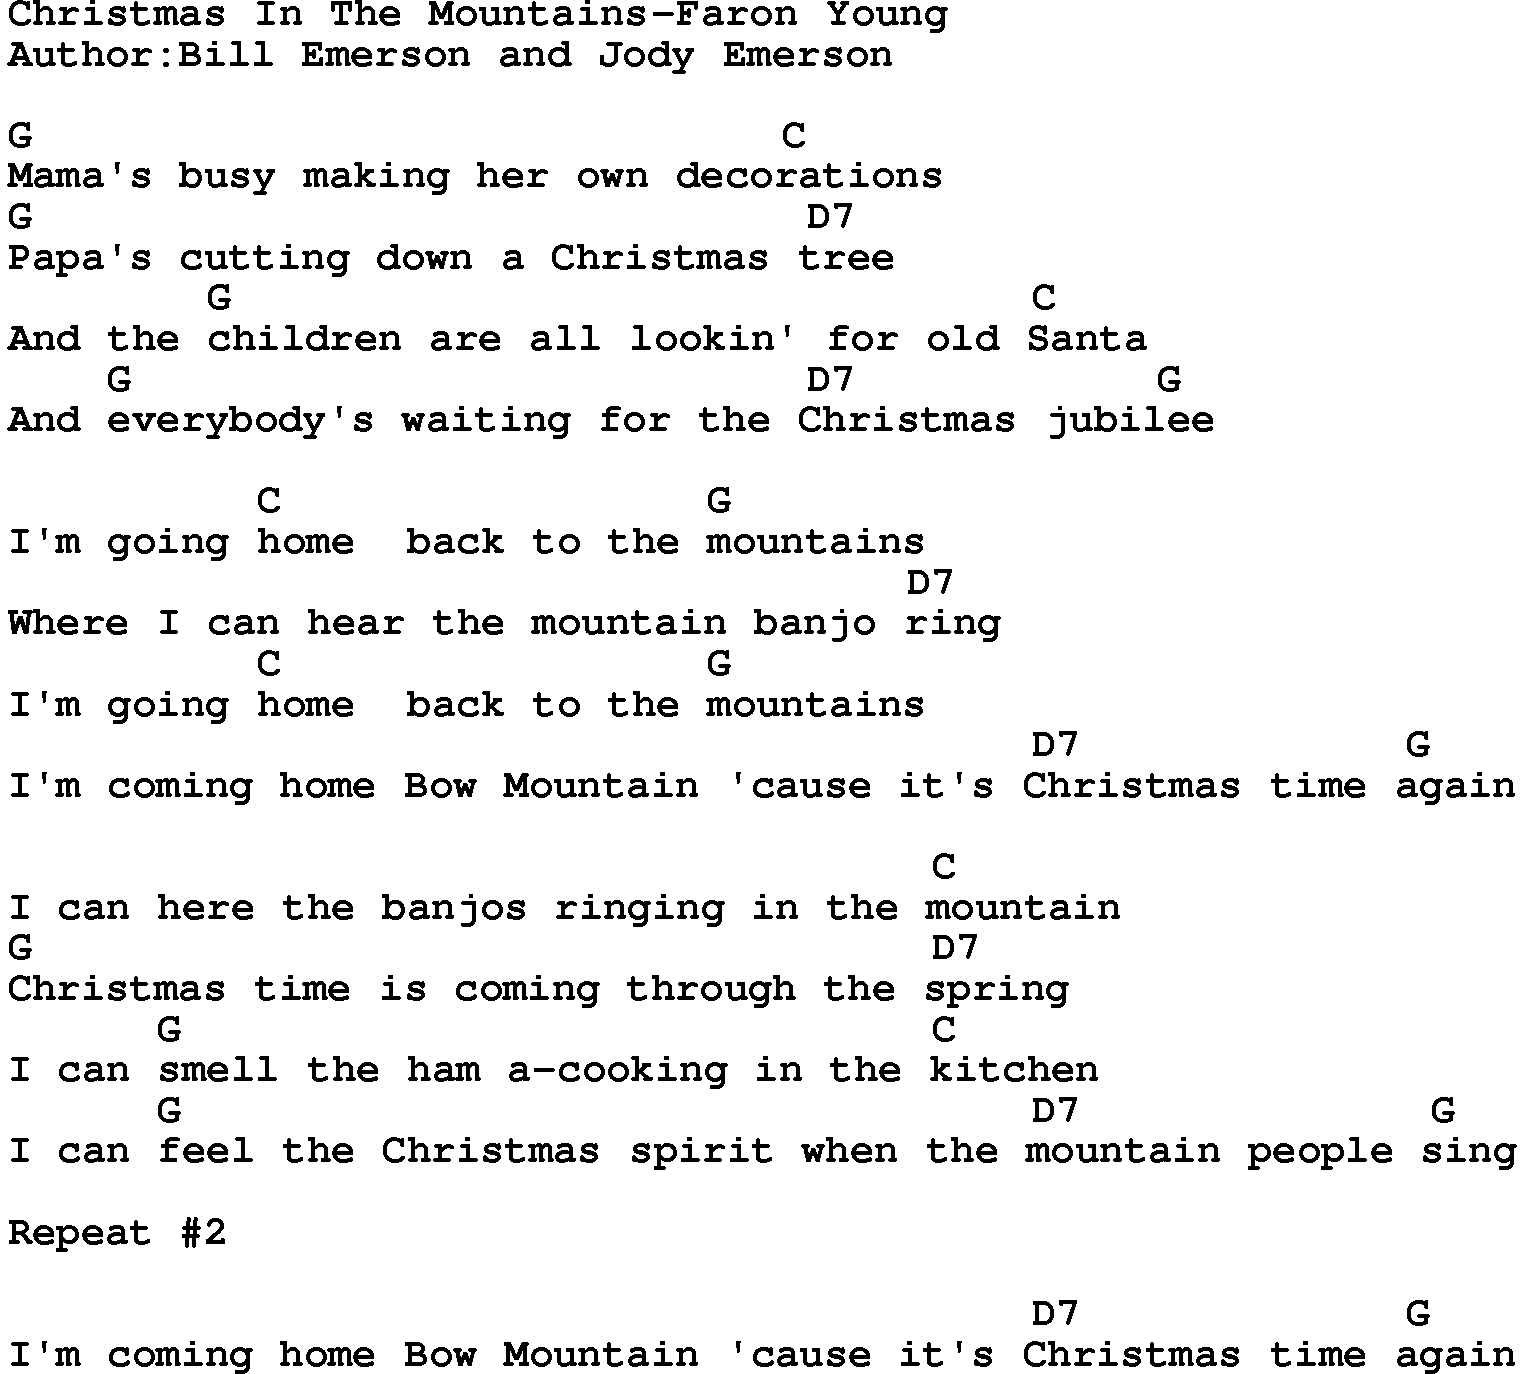 Country music song: Christmas In The Mountains-Faron Young lyrics and chords